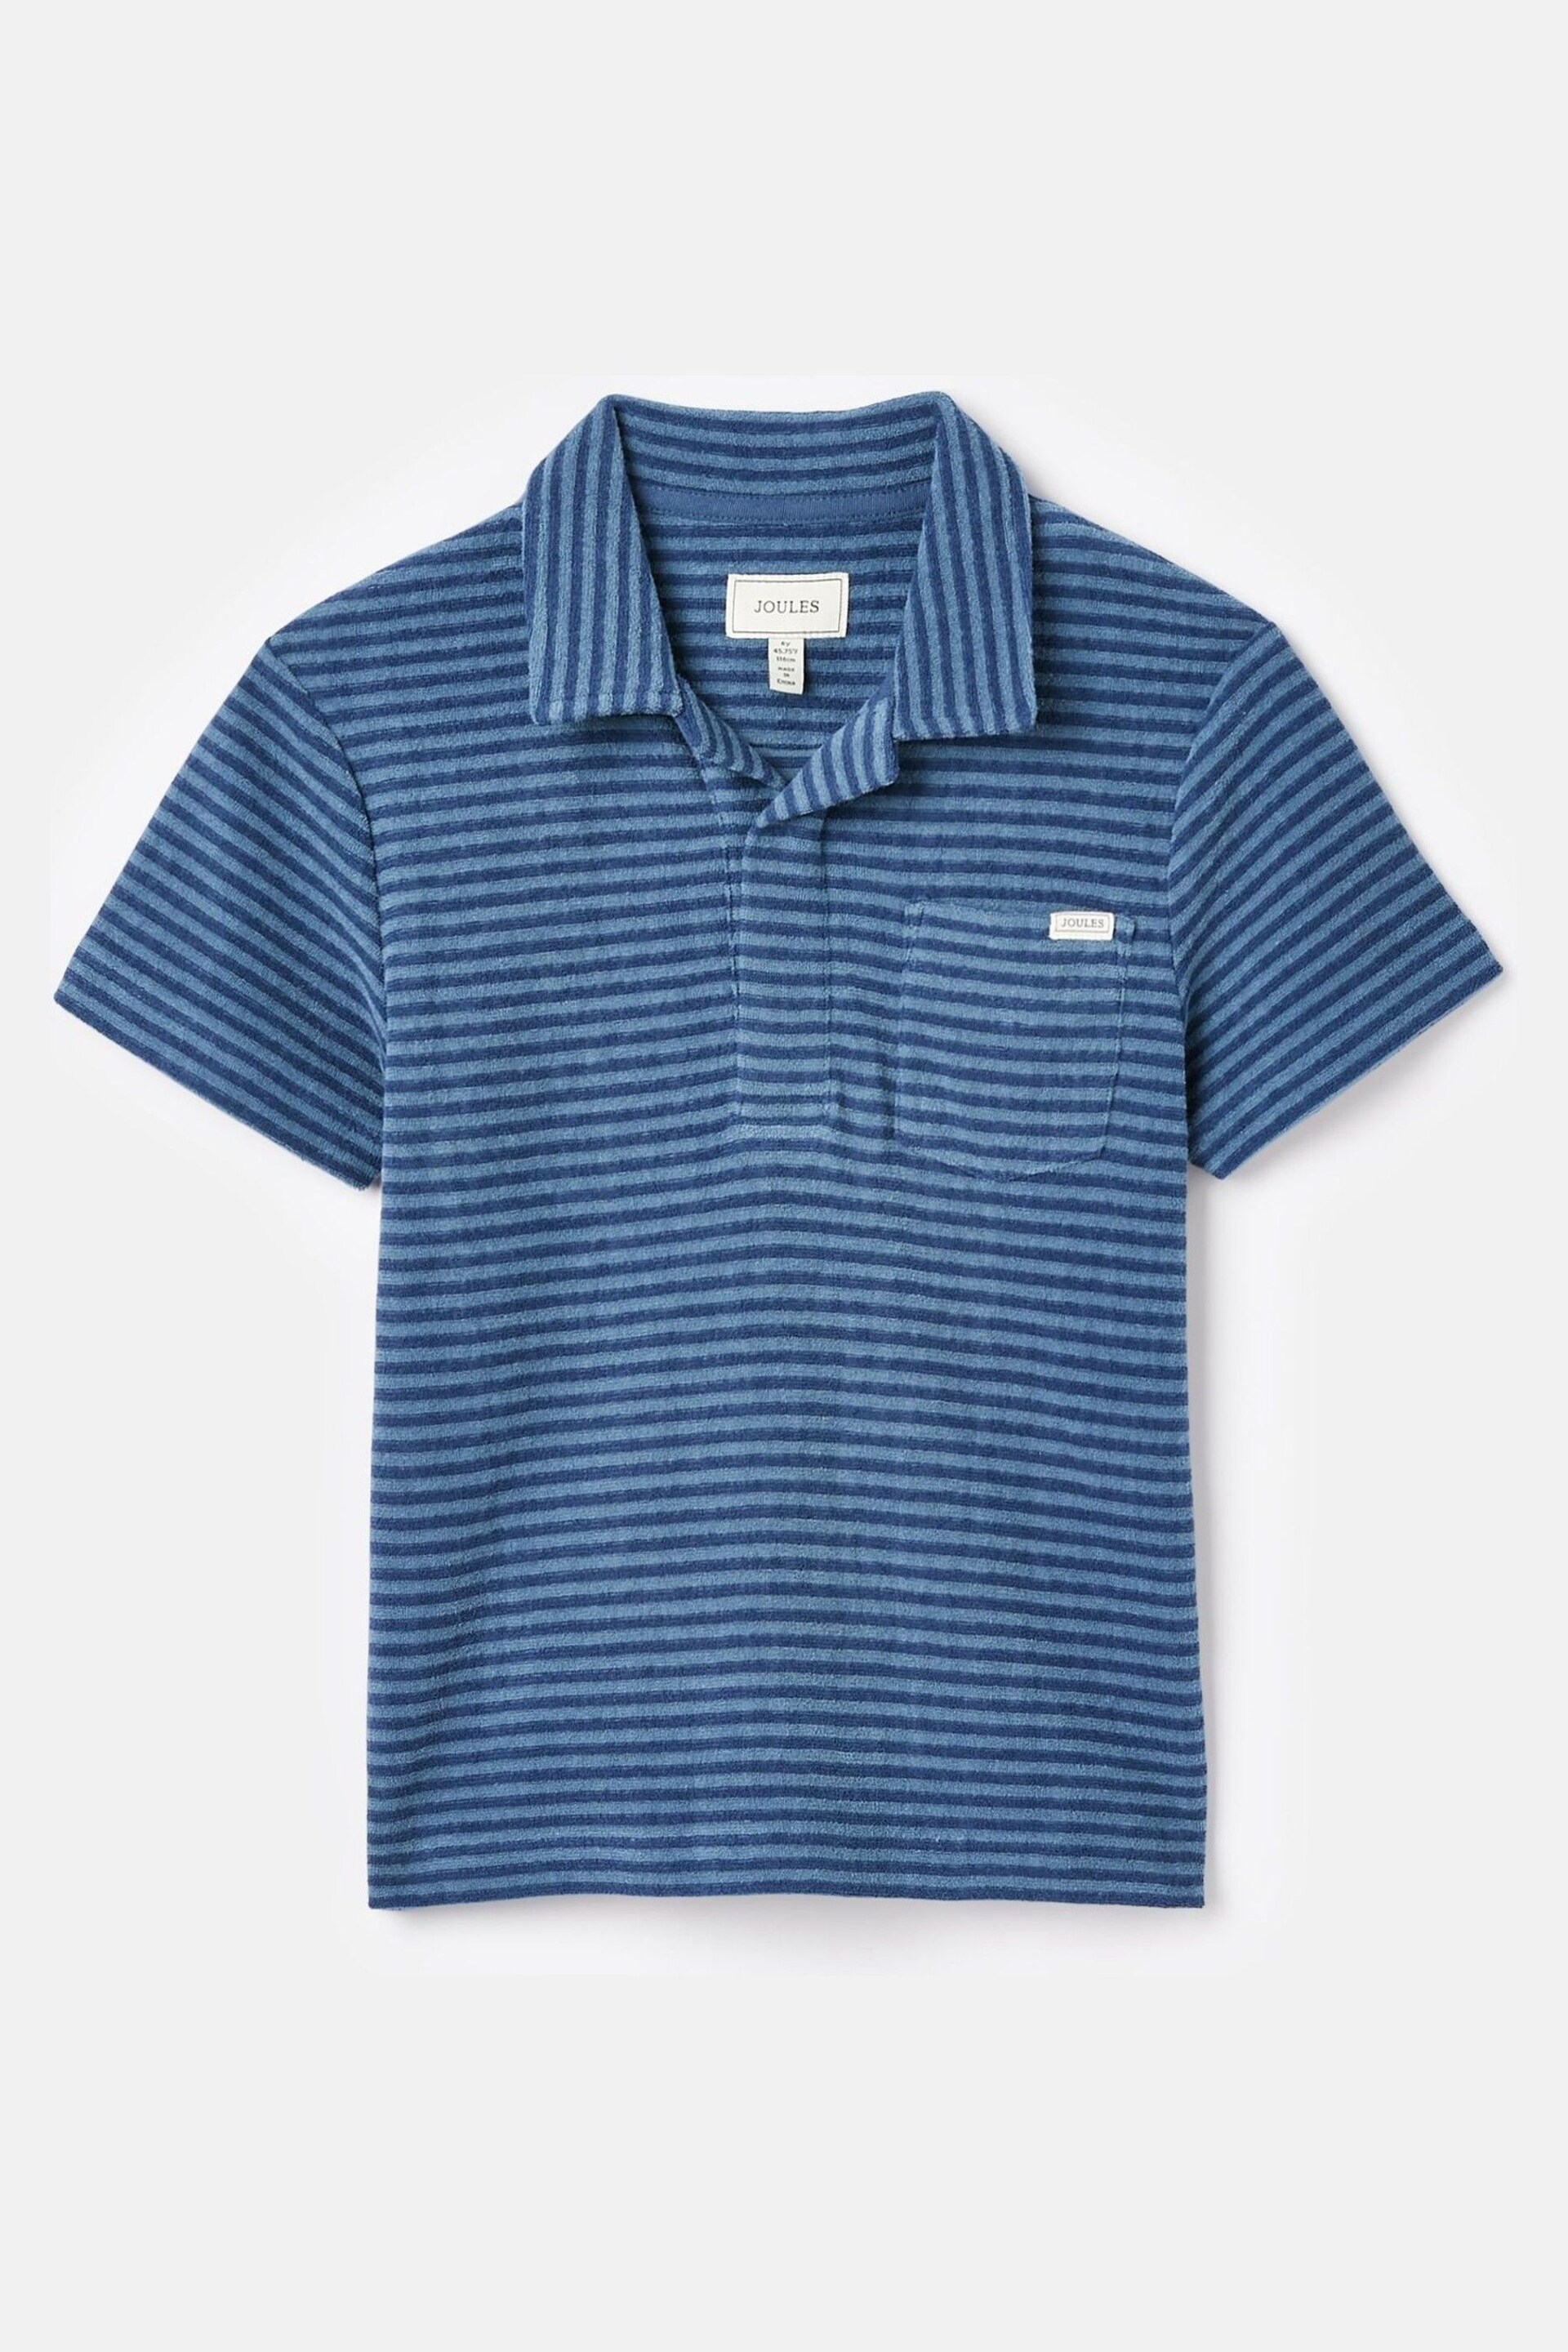 Joules Otto Blue Towelling Polo Shirt - Image 1 of 5